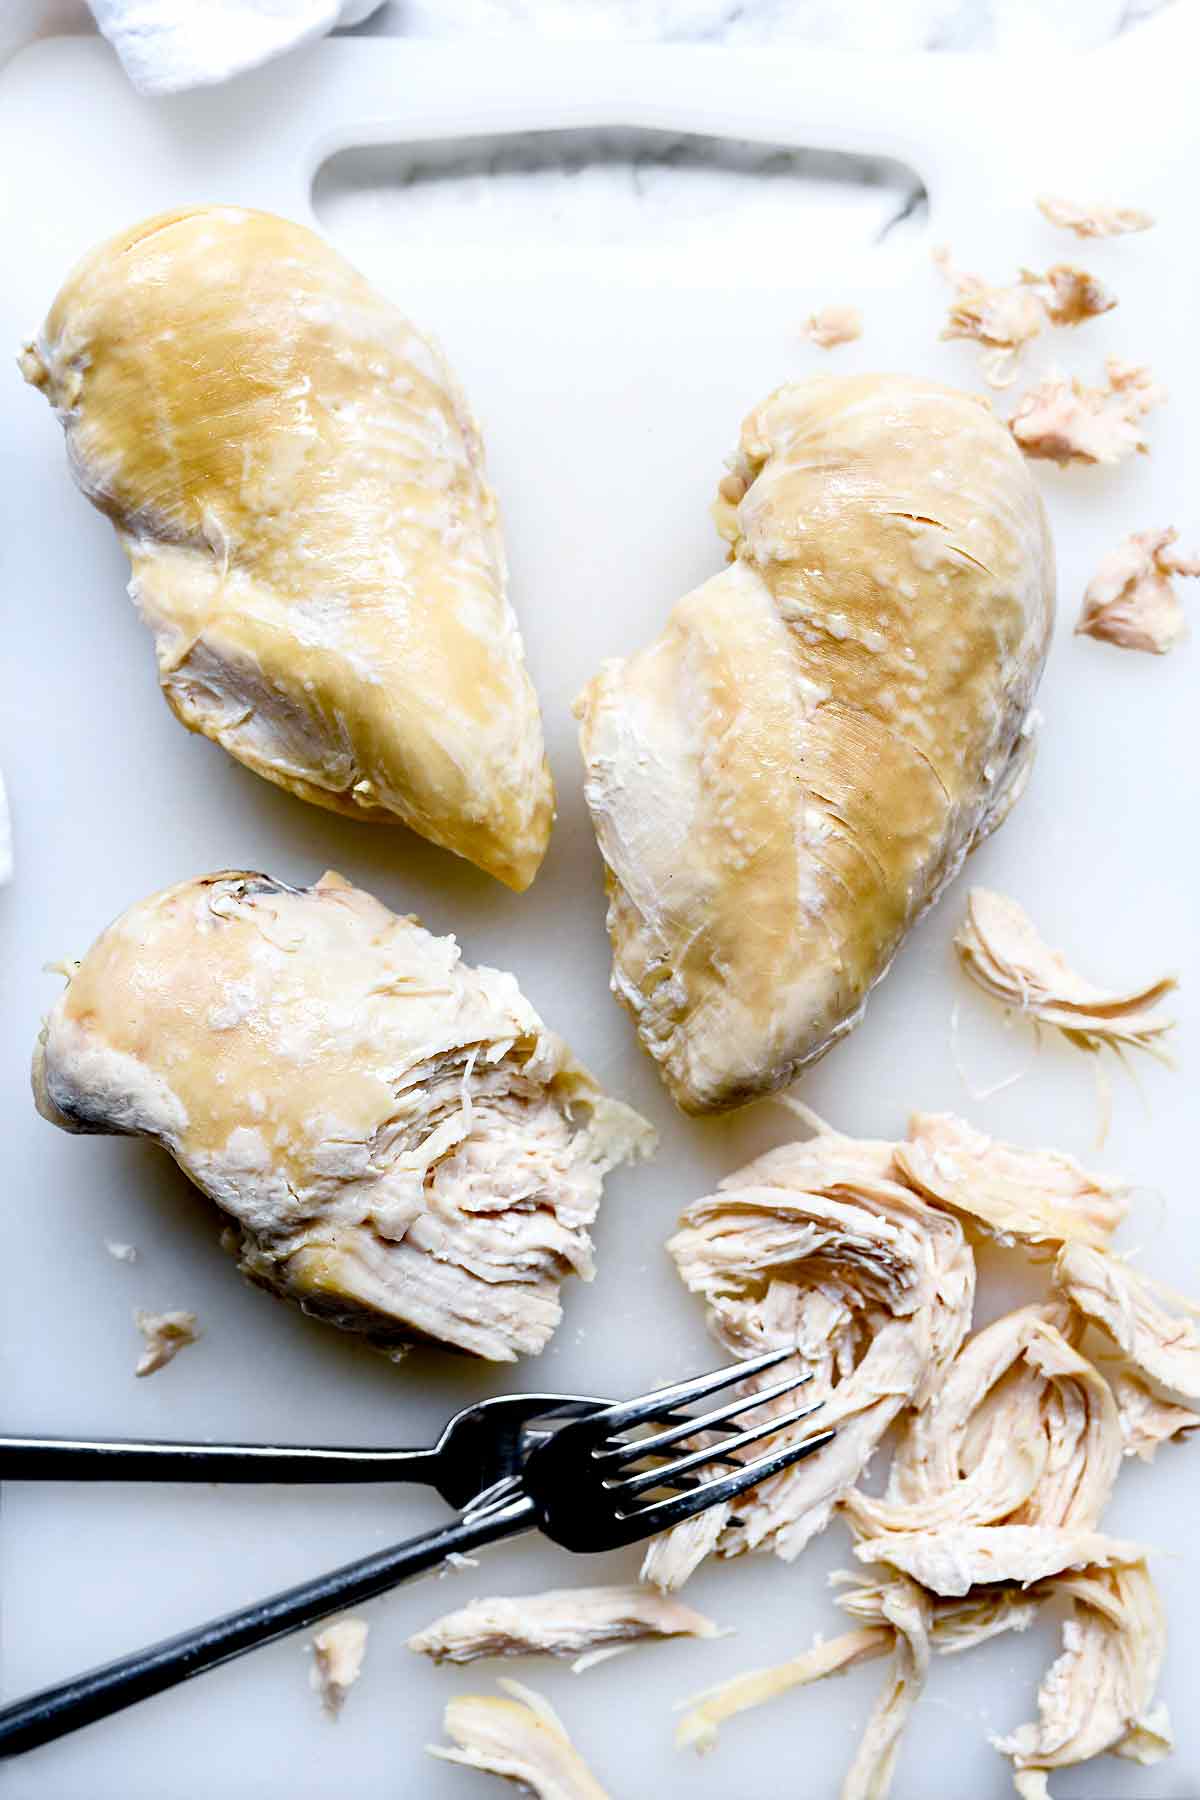 12 Tasty Dinners You Can Make with Frozen Pre-Cooked Chicken